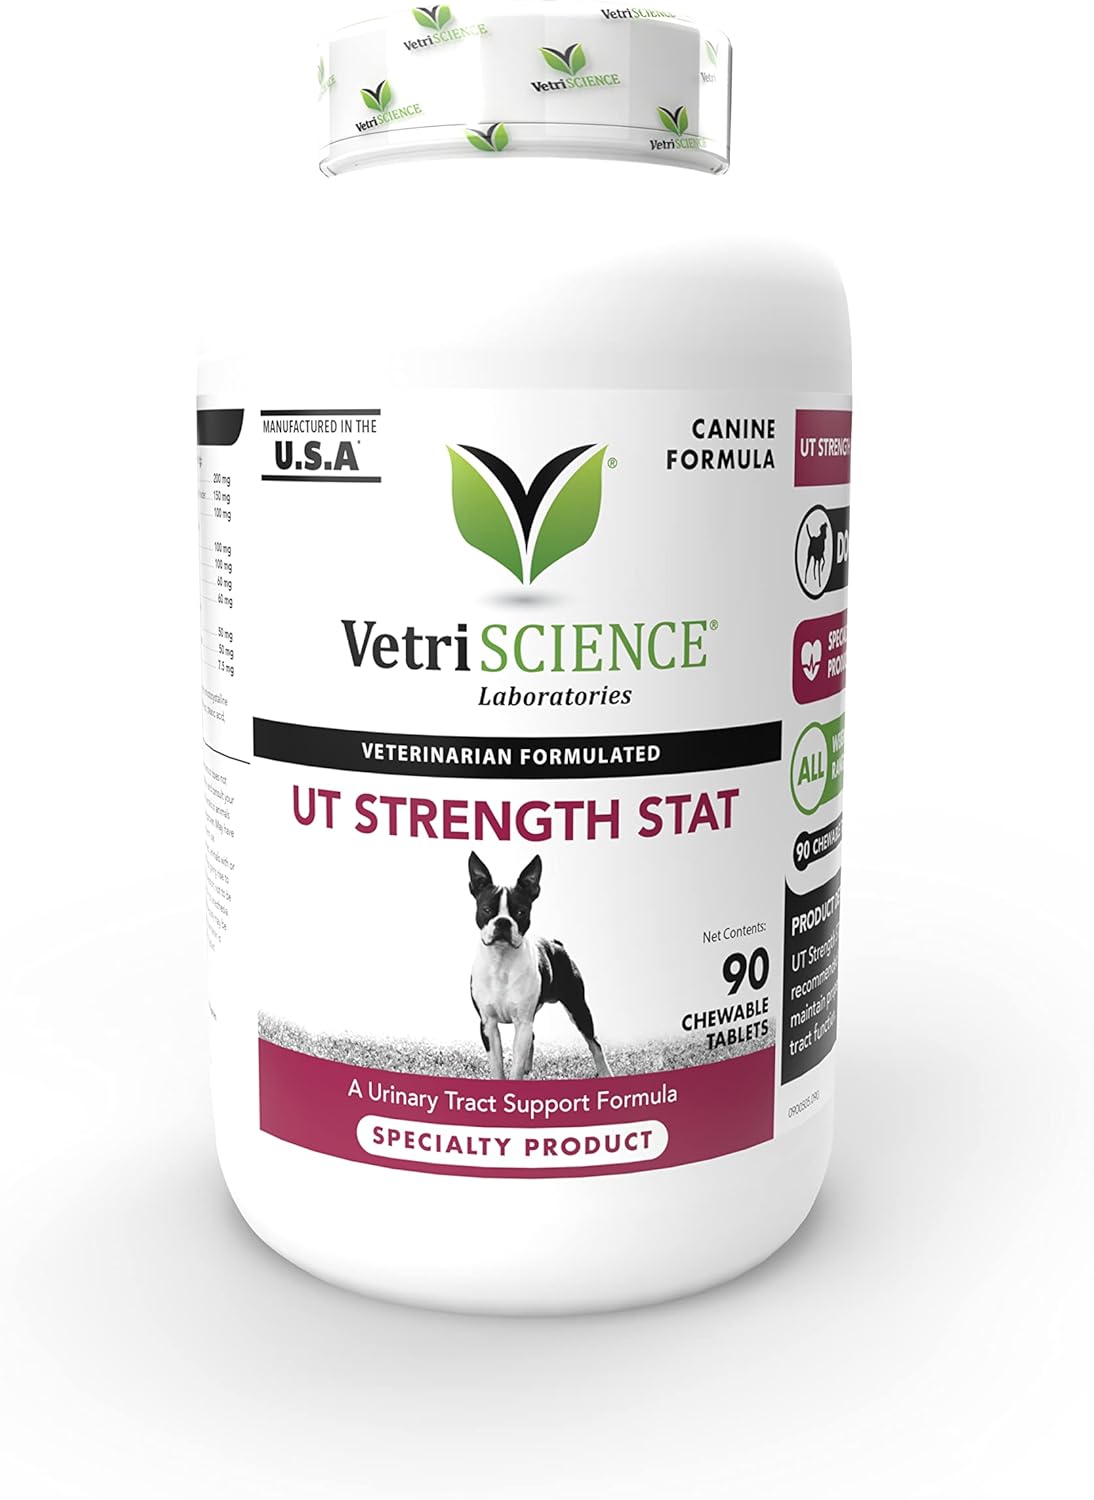 VetriScience Laboratories - UT Strength STAT for Dogs, Urinary Tract Support Supplement for Dogs, 90 Chewable Tablets